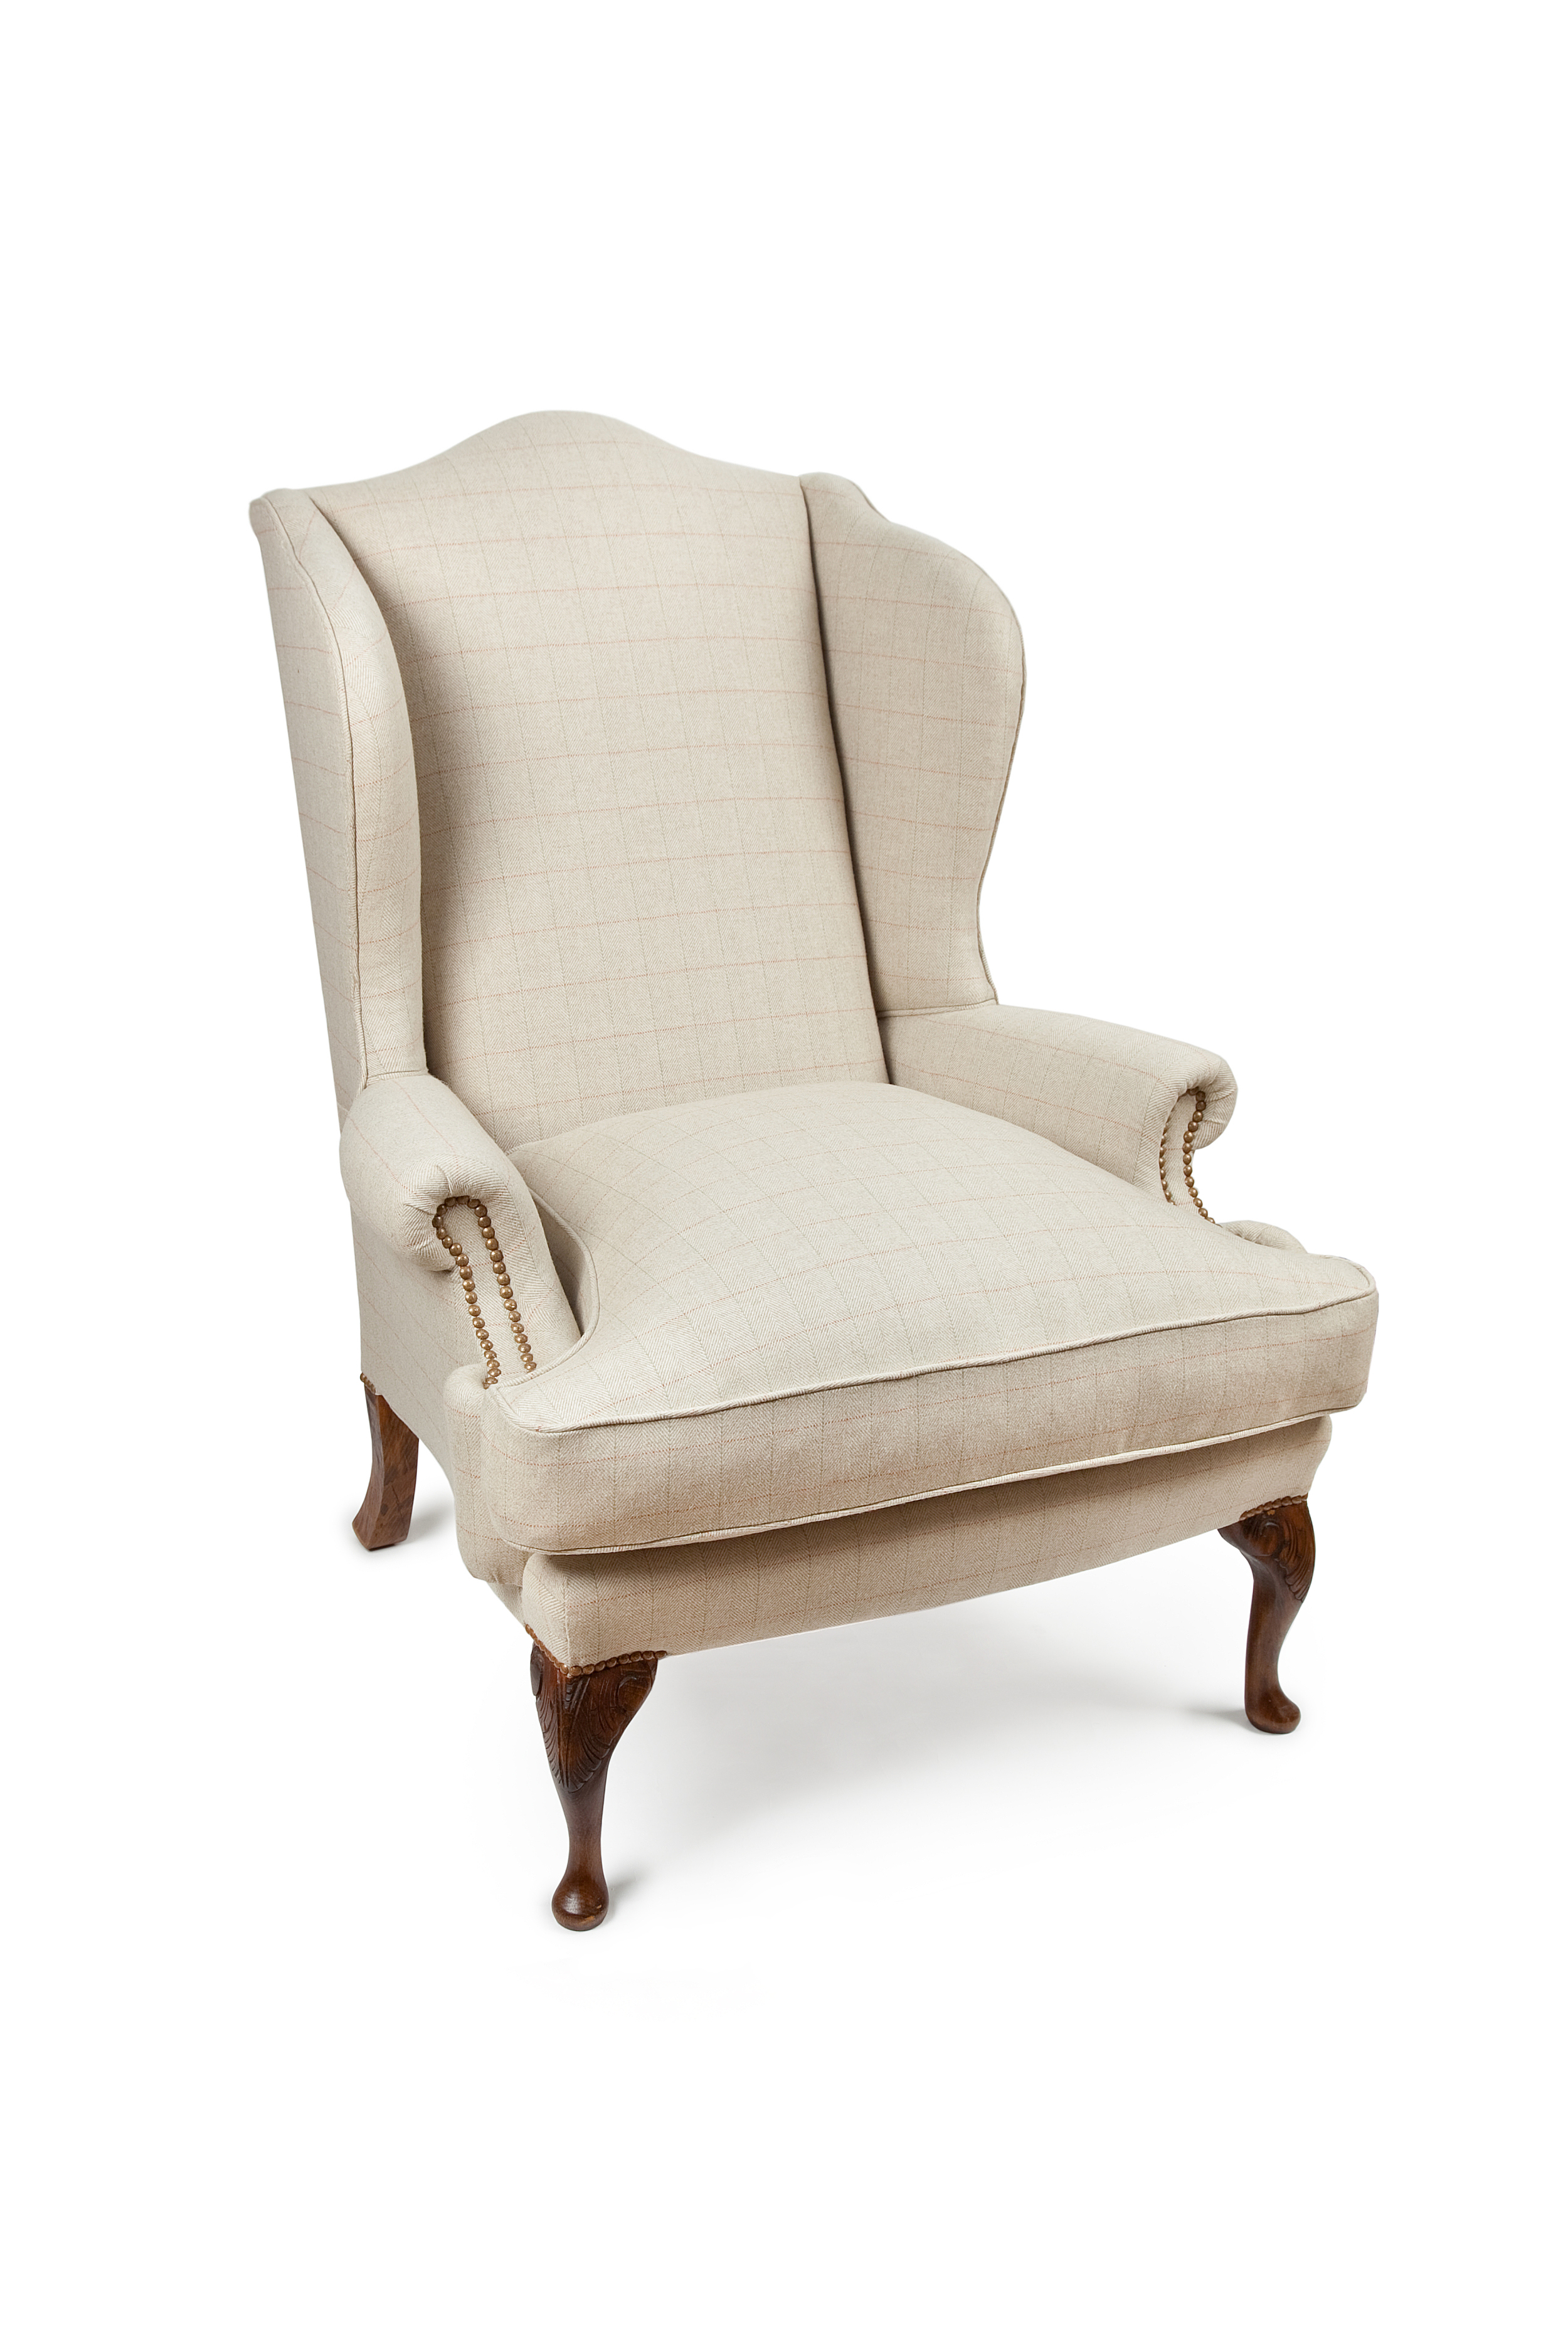  Queen Anne Chair with double scroll arm 